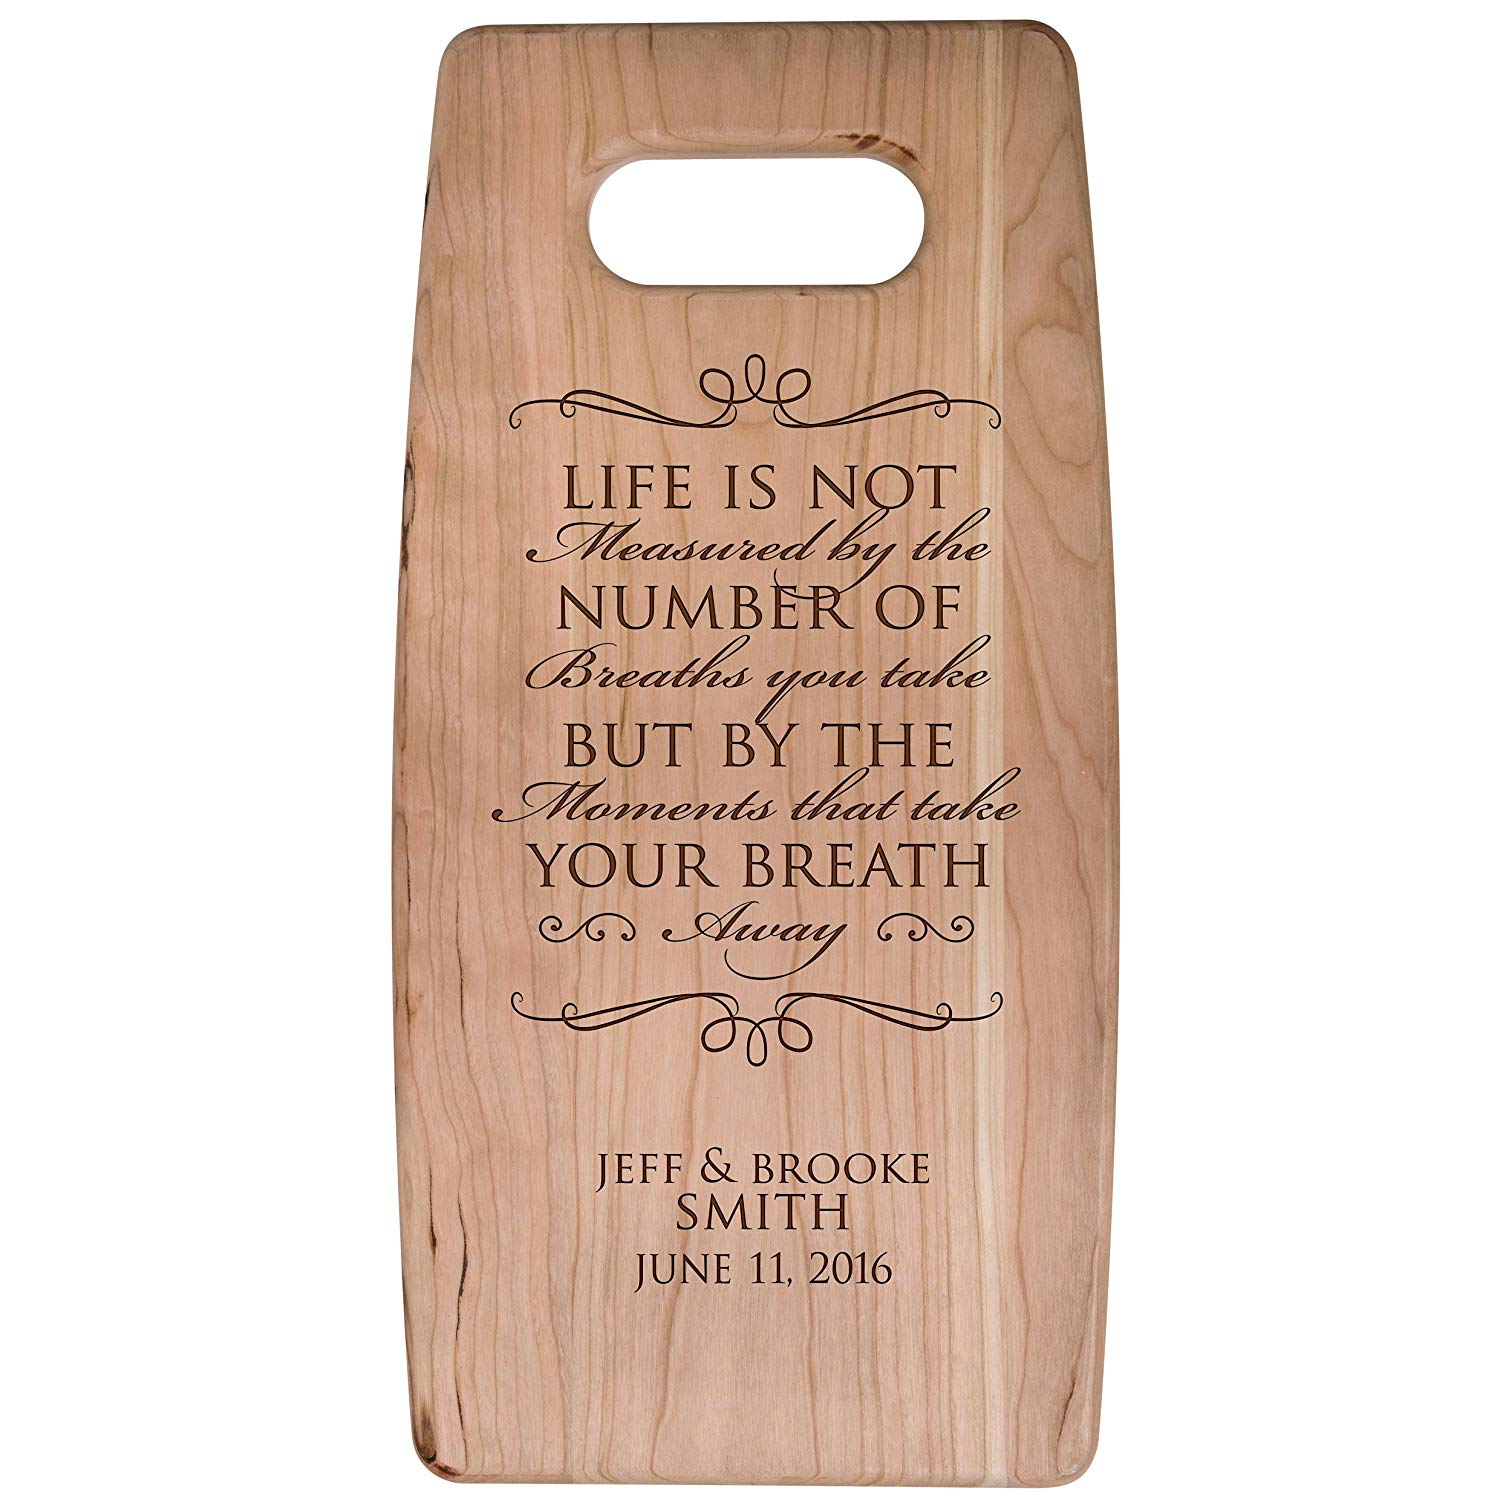 Personalized Cherry Cutting Board - Life Is Not Measured - LifeSong Milestones